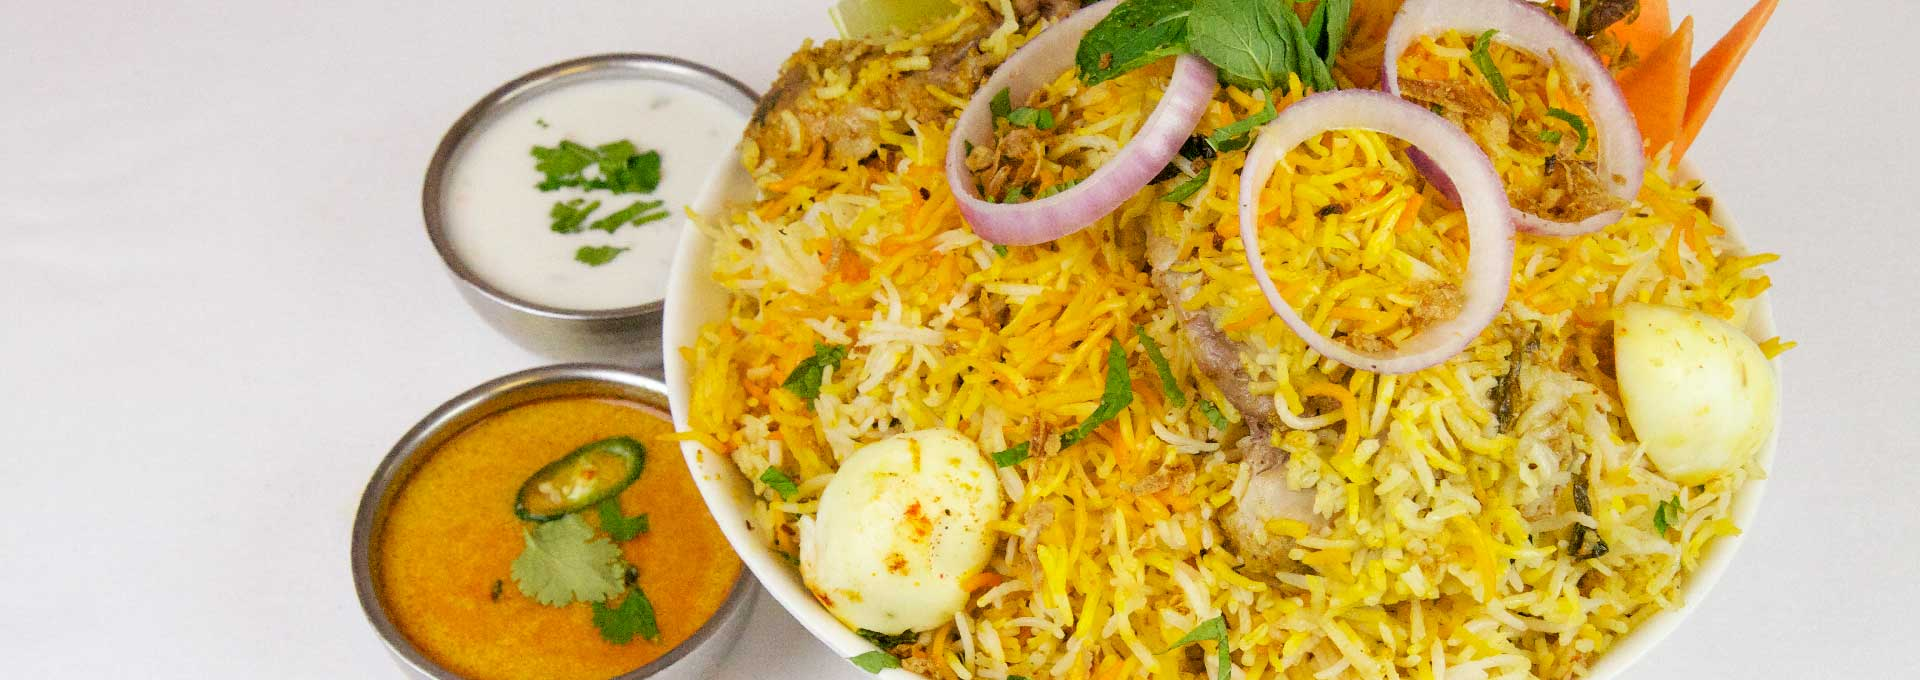 Delicious biryani dish with aromatic spices.